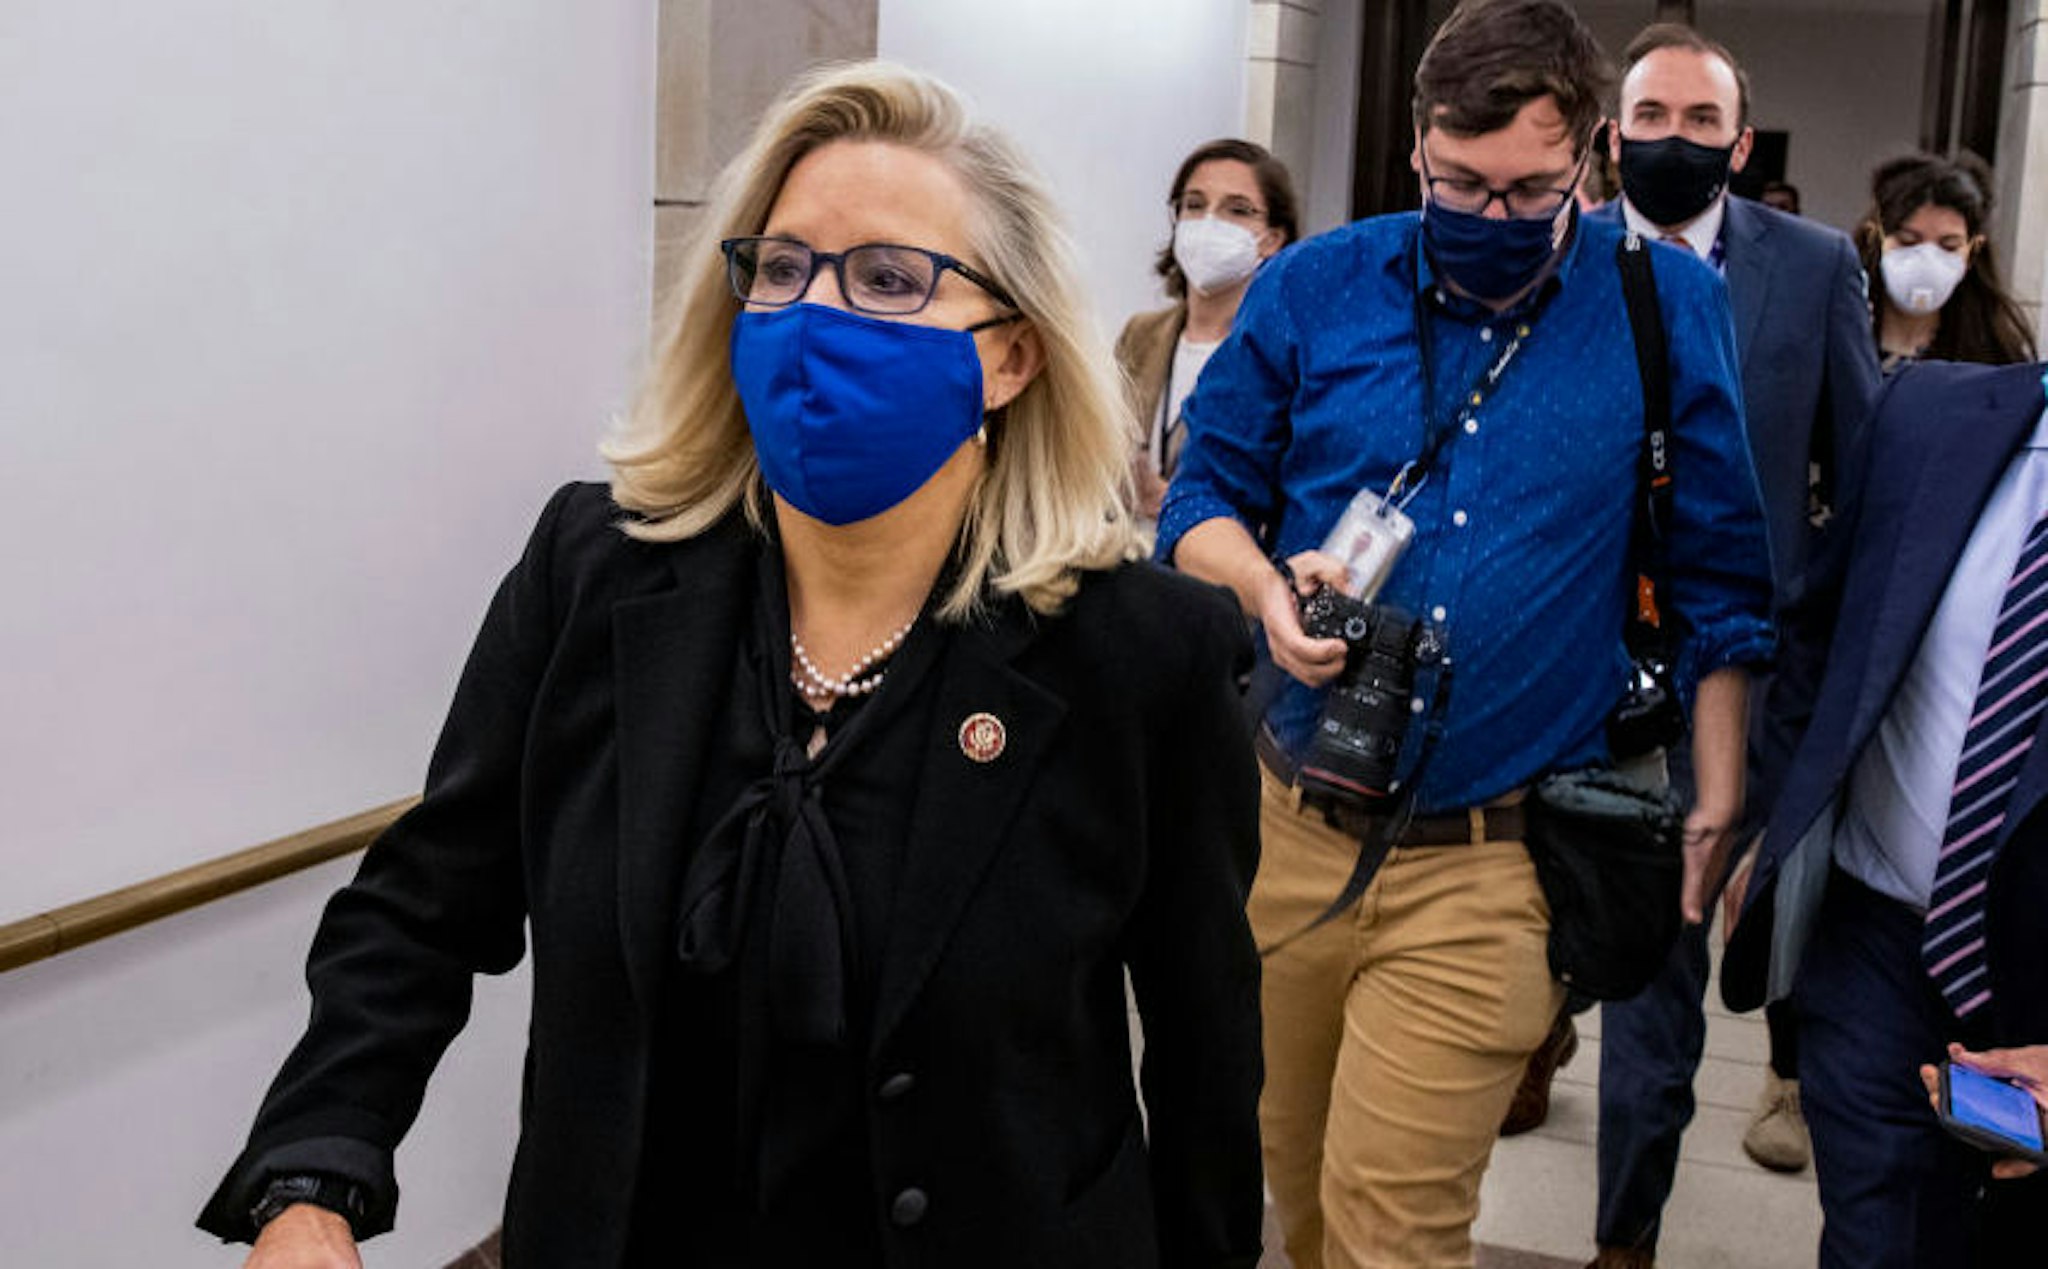 WASHINGTON, DC - FEBRUARY 03: U.S. Rep. Liz Cheney (R-WY) heads to the House floor to vote at the U.S. Capitol on February 03, 2021 in Washington, DC. Cheney was one of 10 House Republicans who voted to impeach former President Donald Trump for inciting the insurrection at the U.S. Capitol.